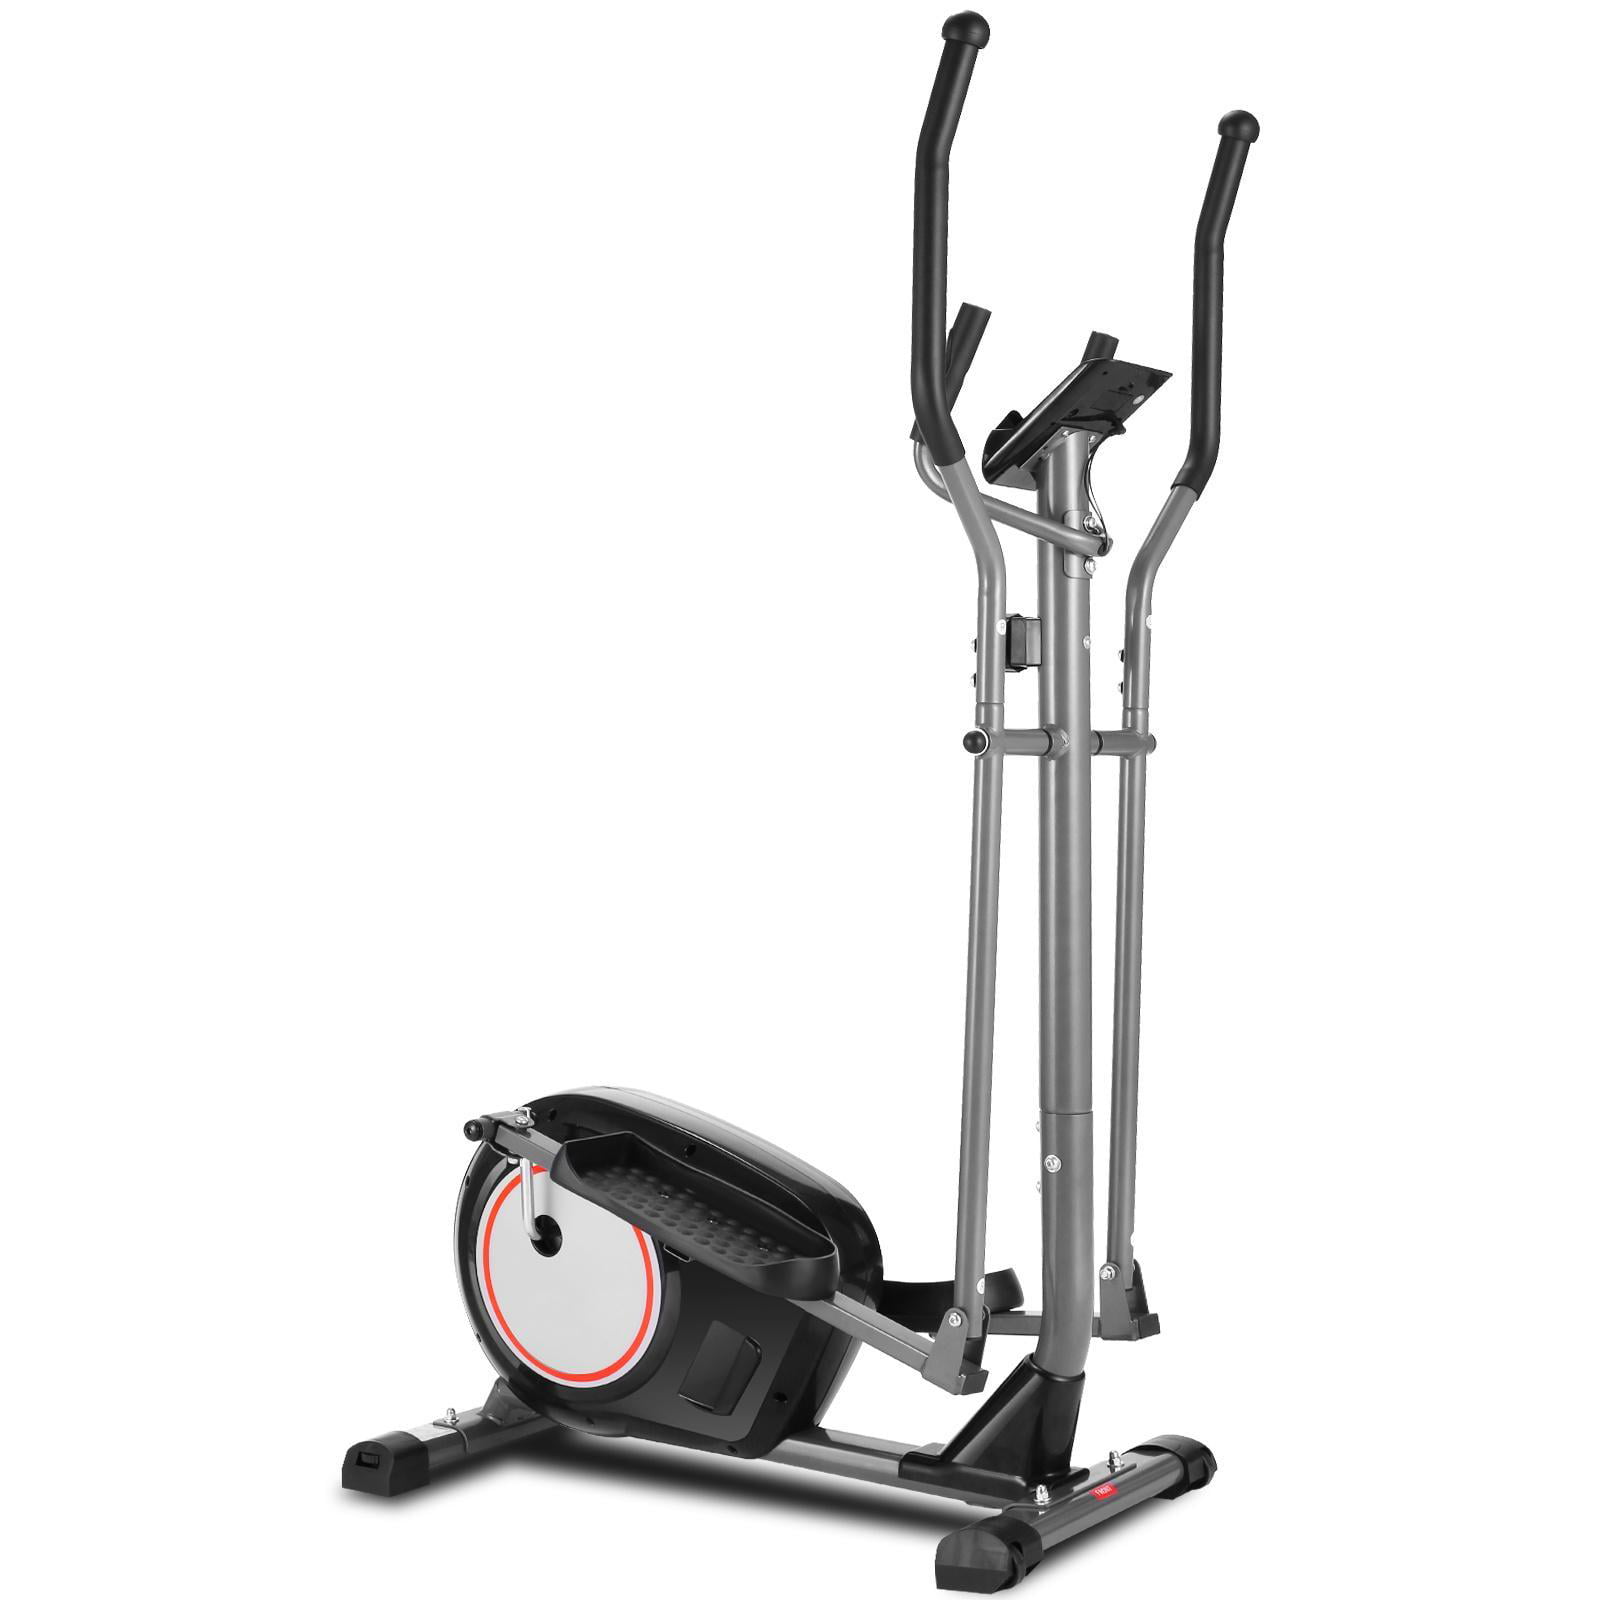 Details about  / Magnetic Elliptical Trainer Exercise Fitness Training Machine Led Display Mute^^